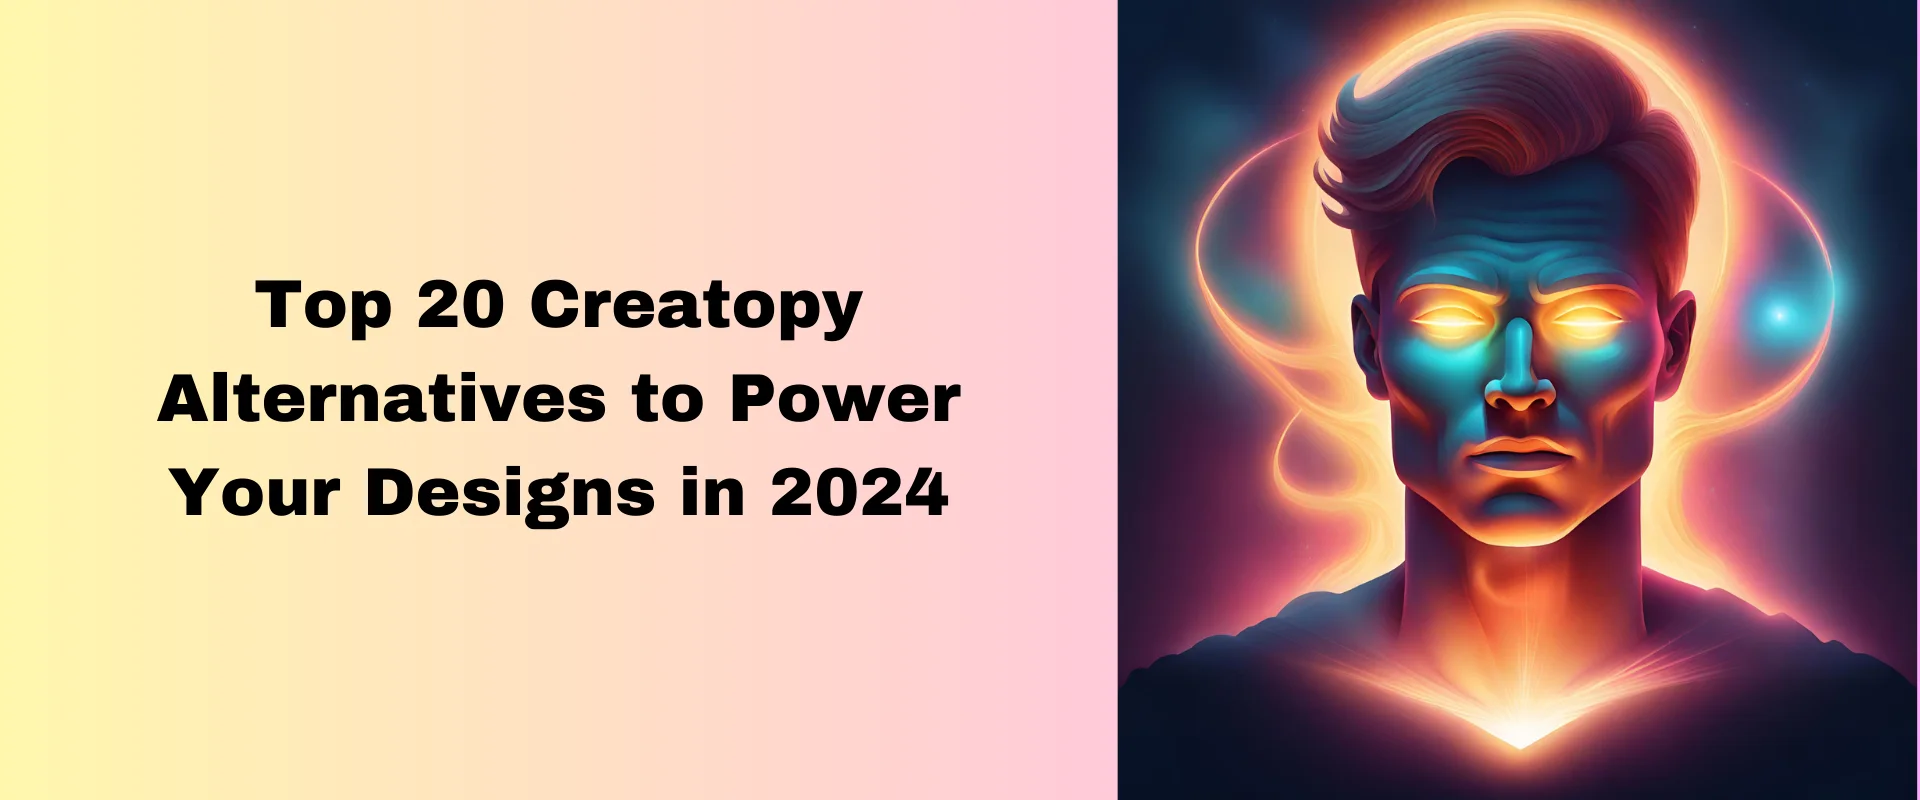 Top 20 Creatopy Alternatives to Power Your Designs in 2024